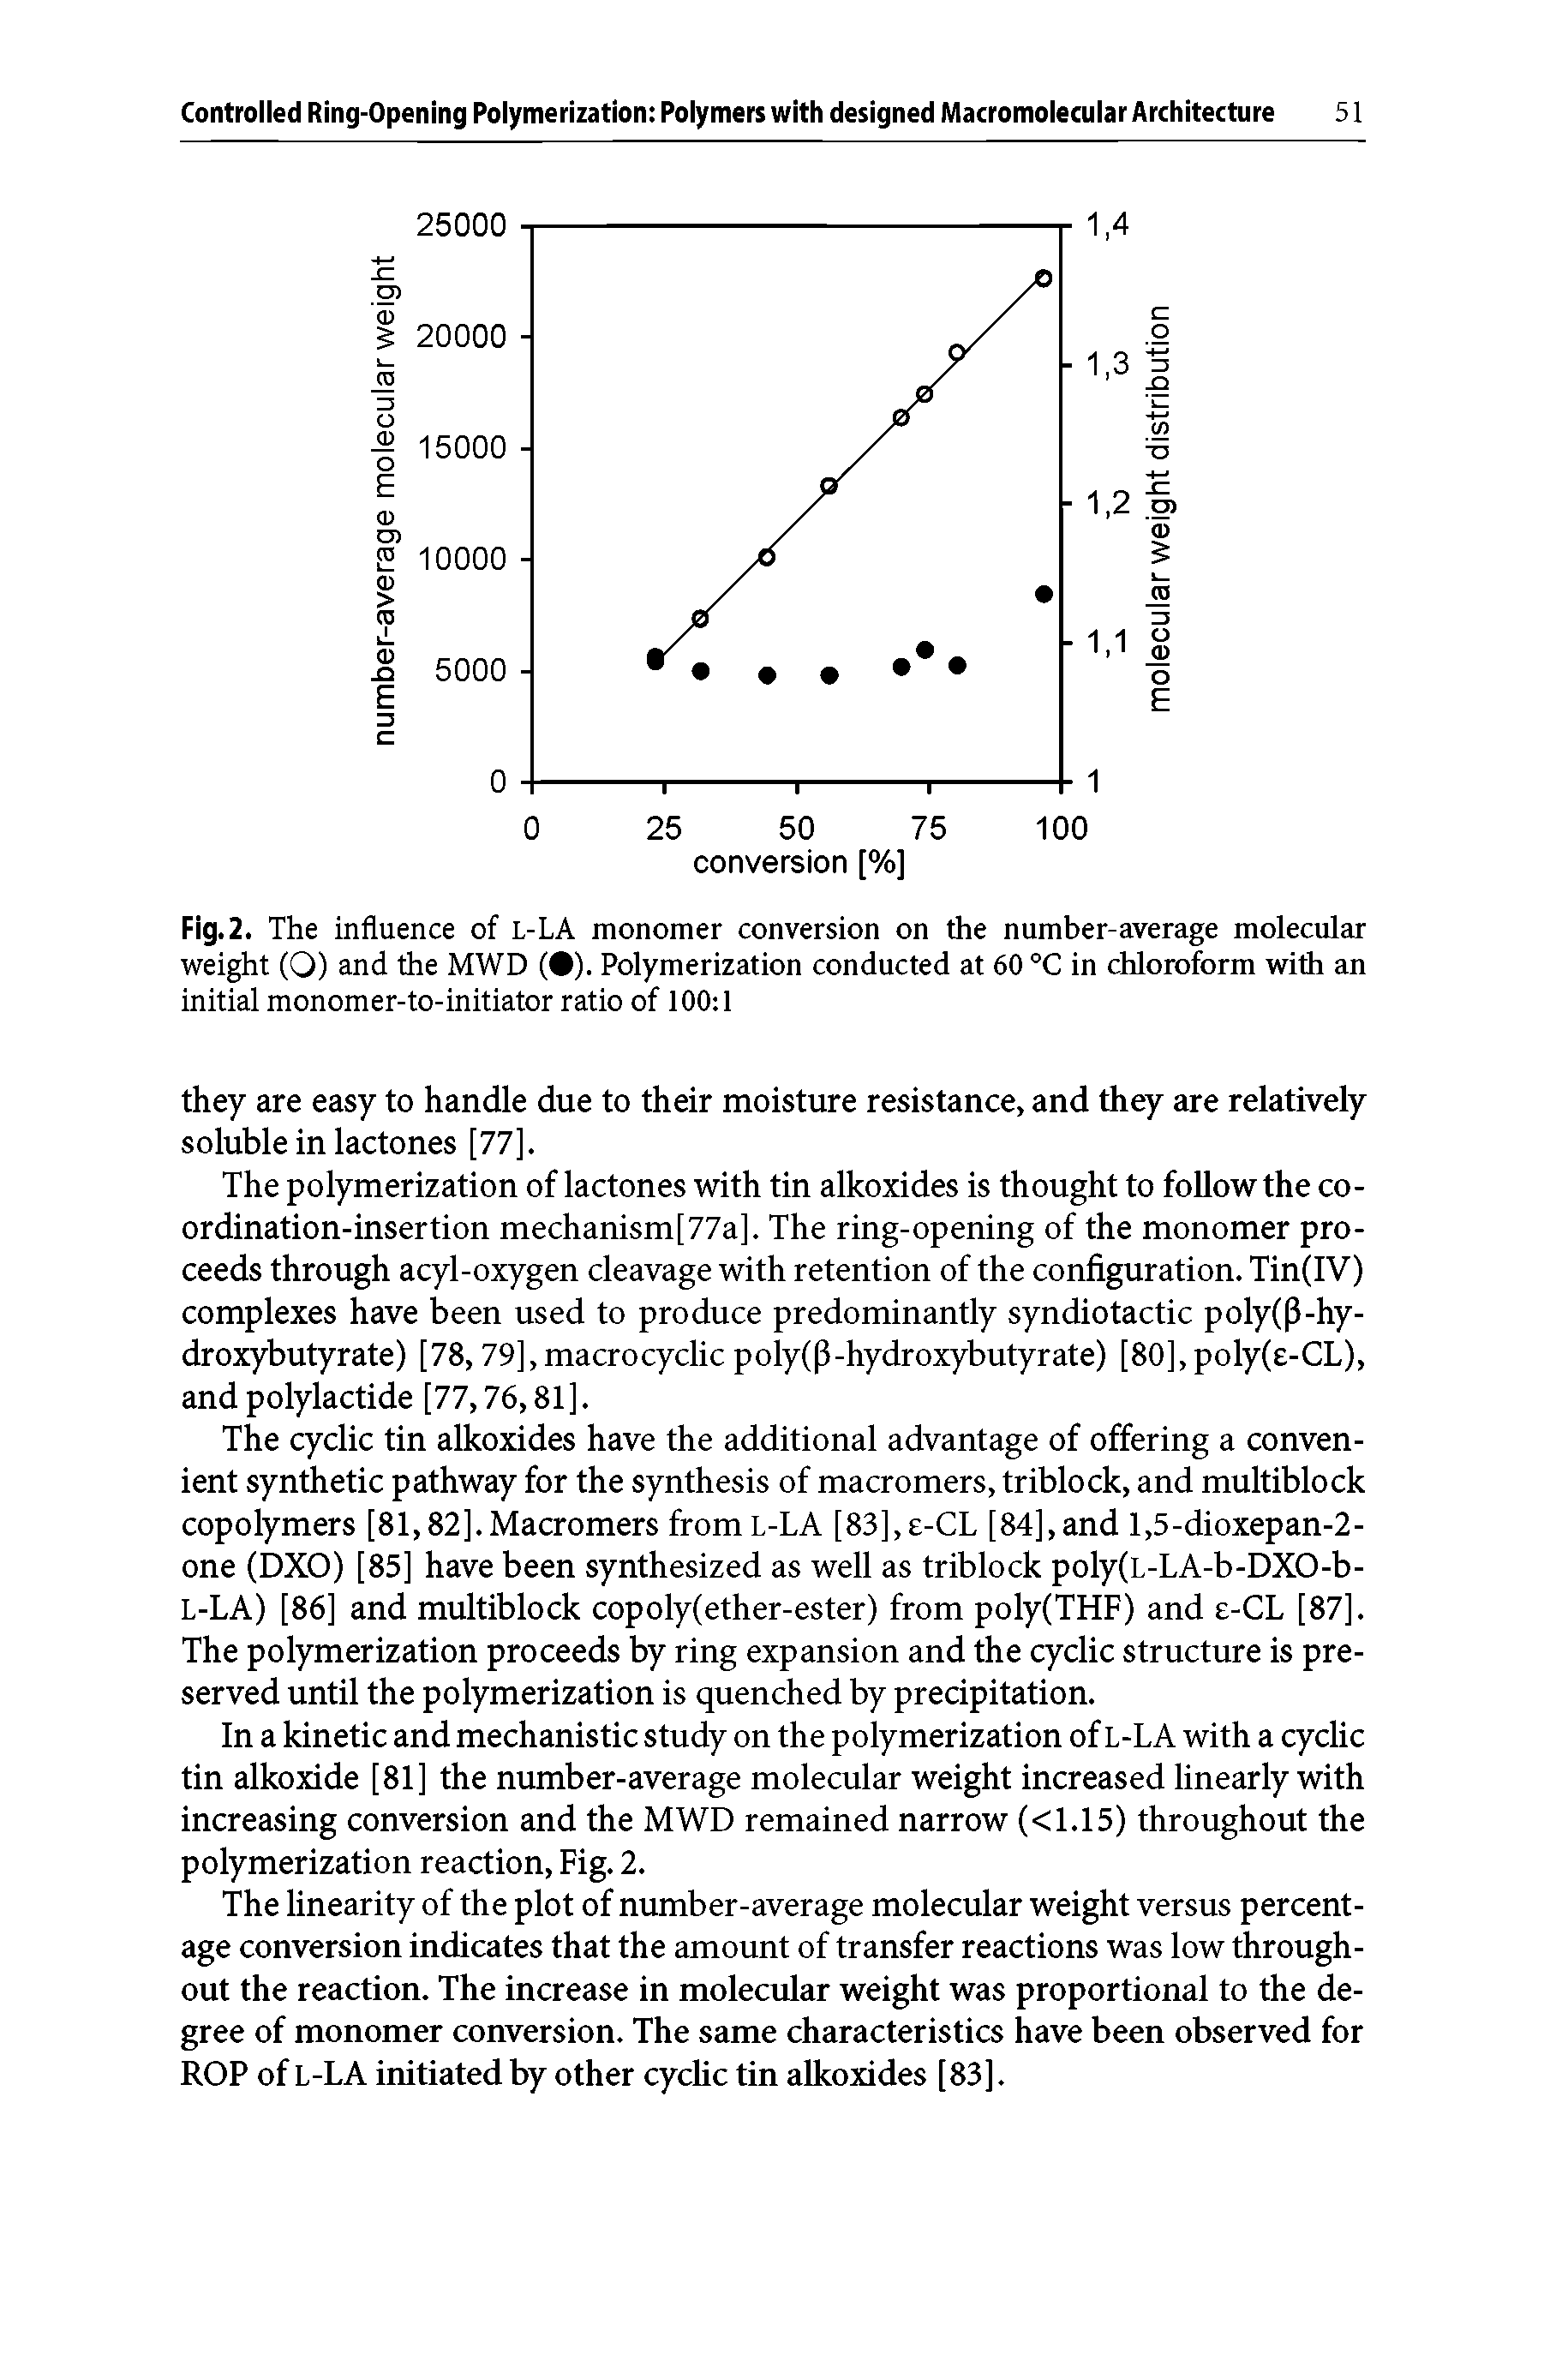 Fig. 2. The influence of l-LA monomer conversion on the number-average molecular weight (O) and the MWD ( ). Polymerization conducted at 60 °C in chloroform with an initial monomer-to-initiator ratio of 100 1...